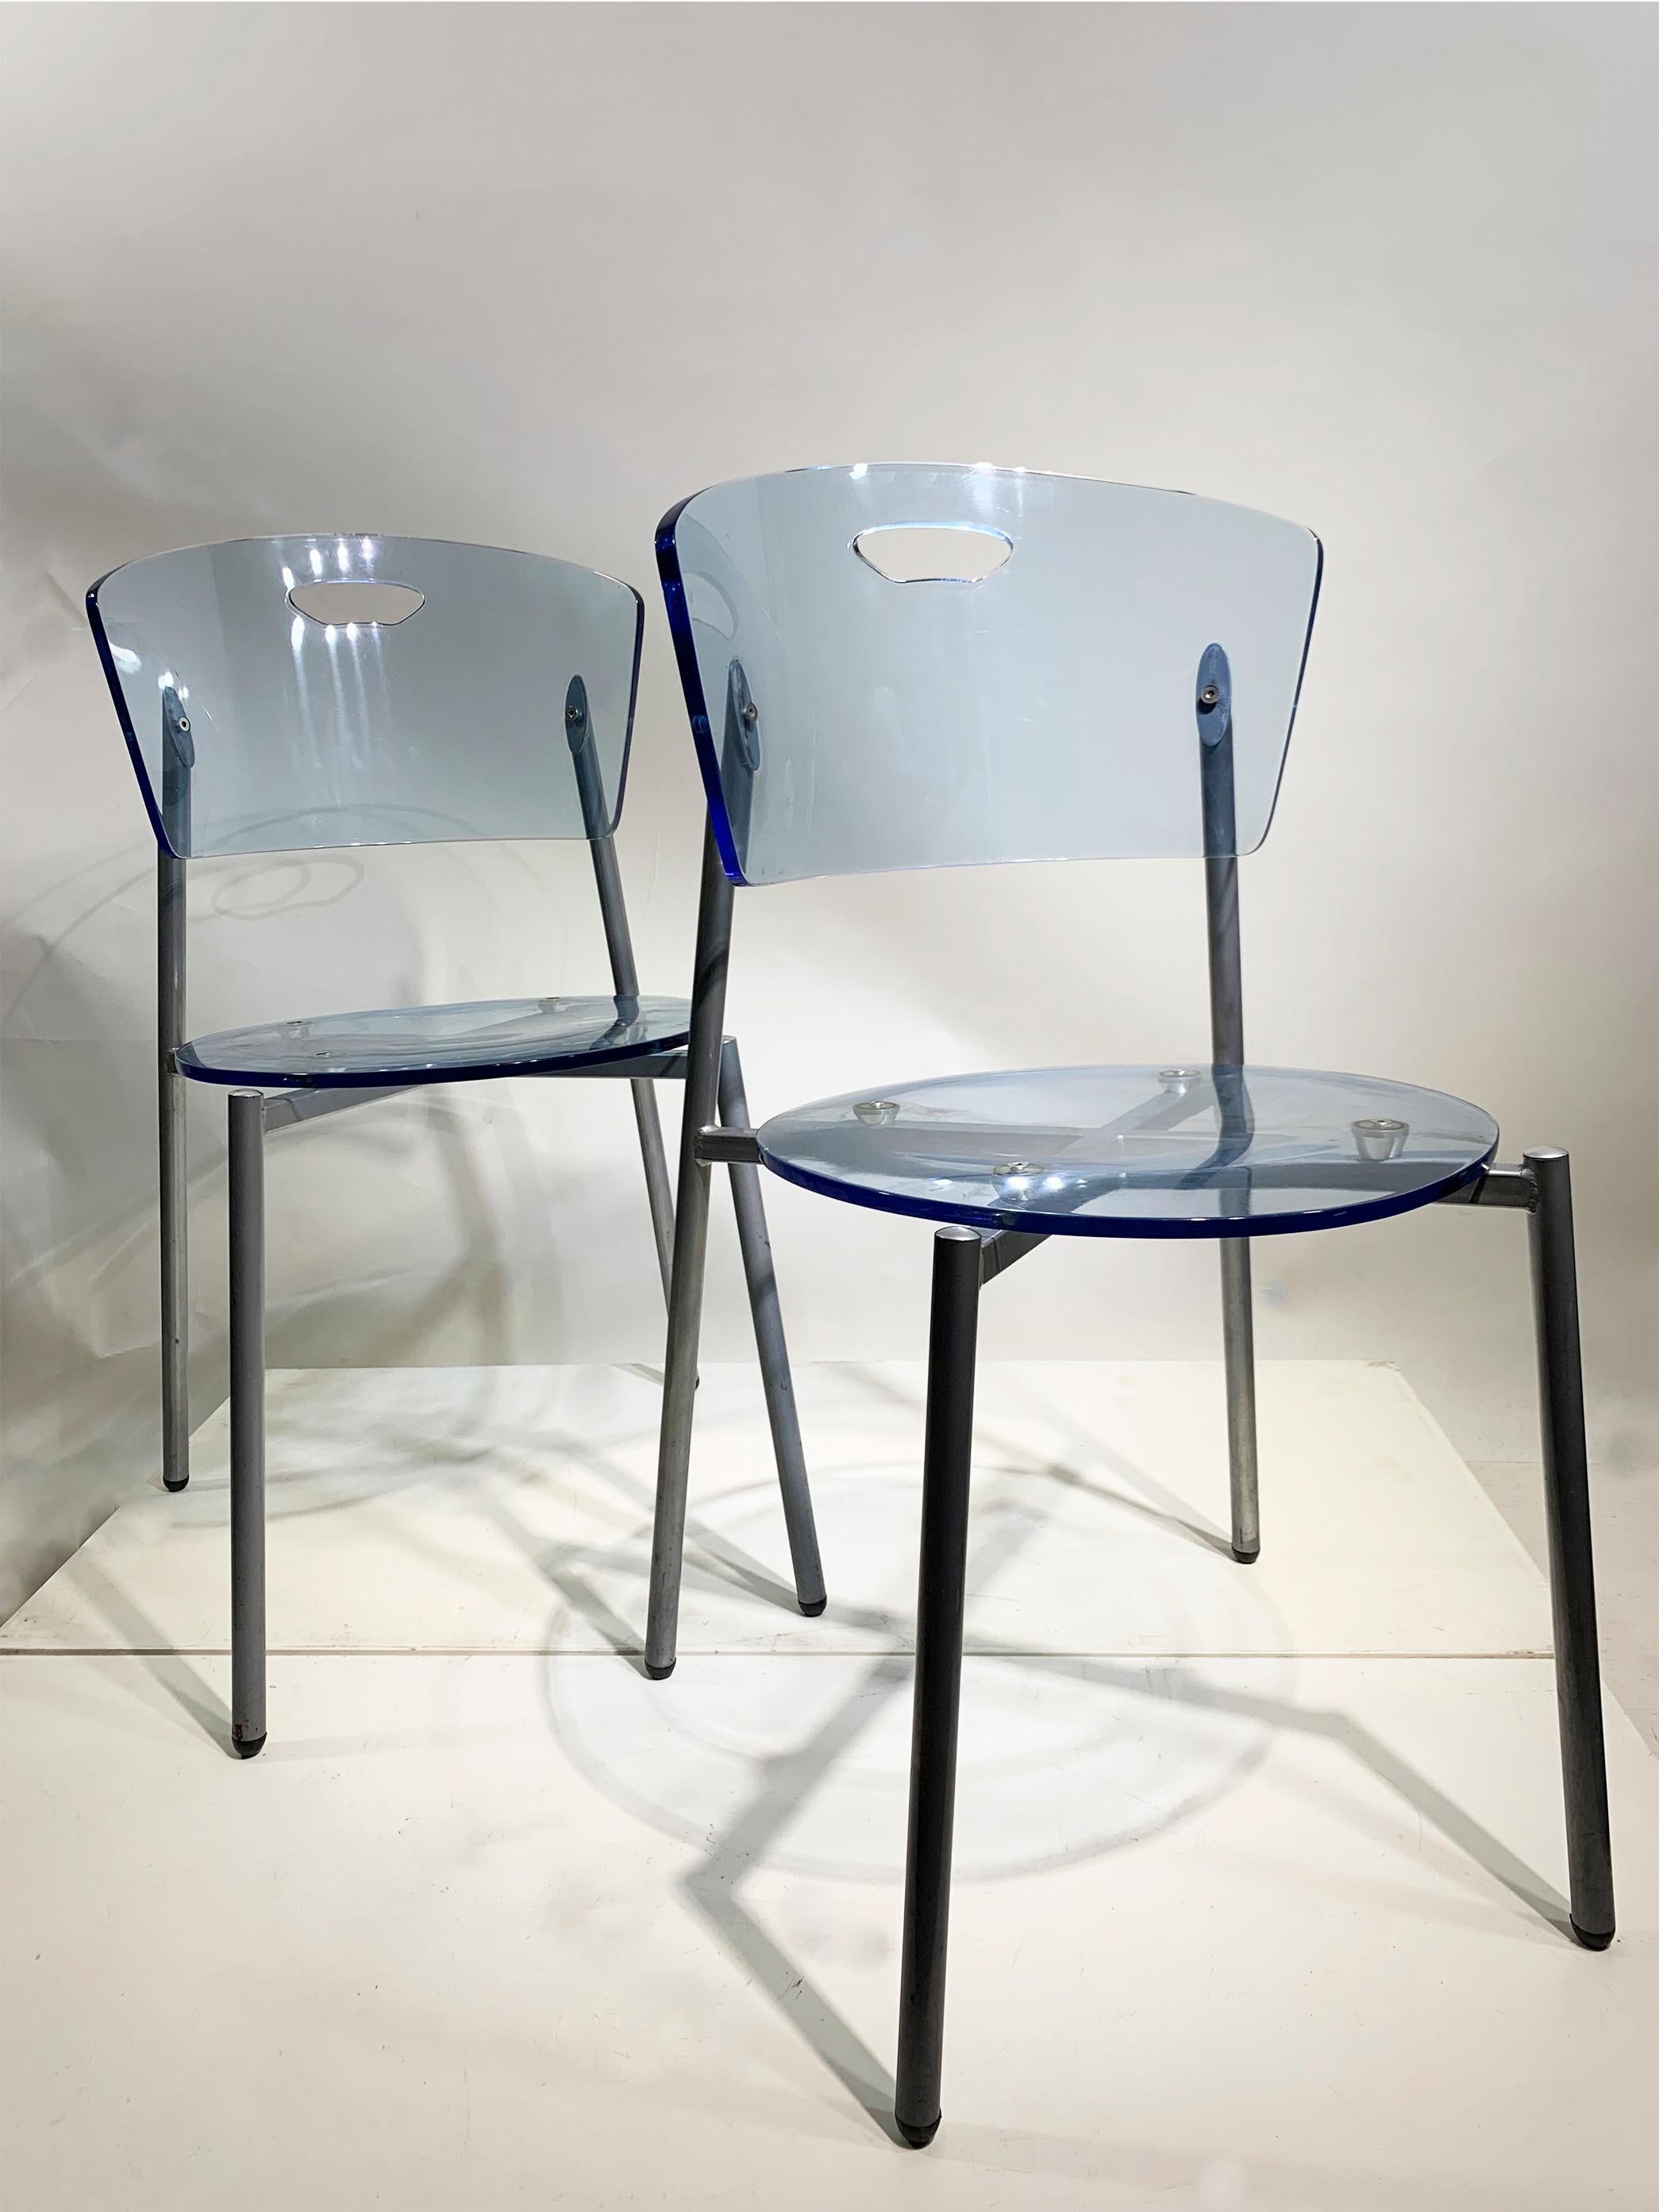 Set of 4 Mid-Century Modern Blue Transparent PMMA Chairs  In Good Condition For Sale In Beirut, LB